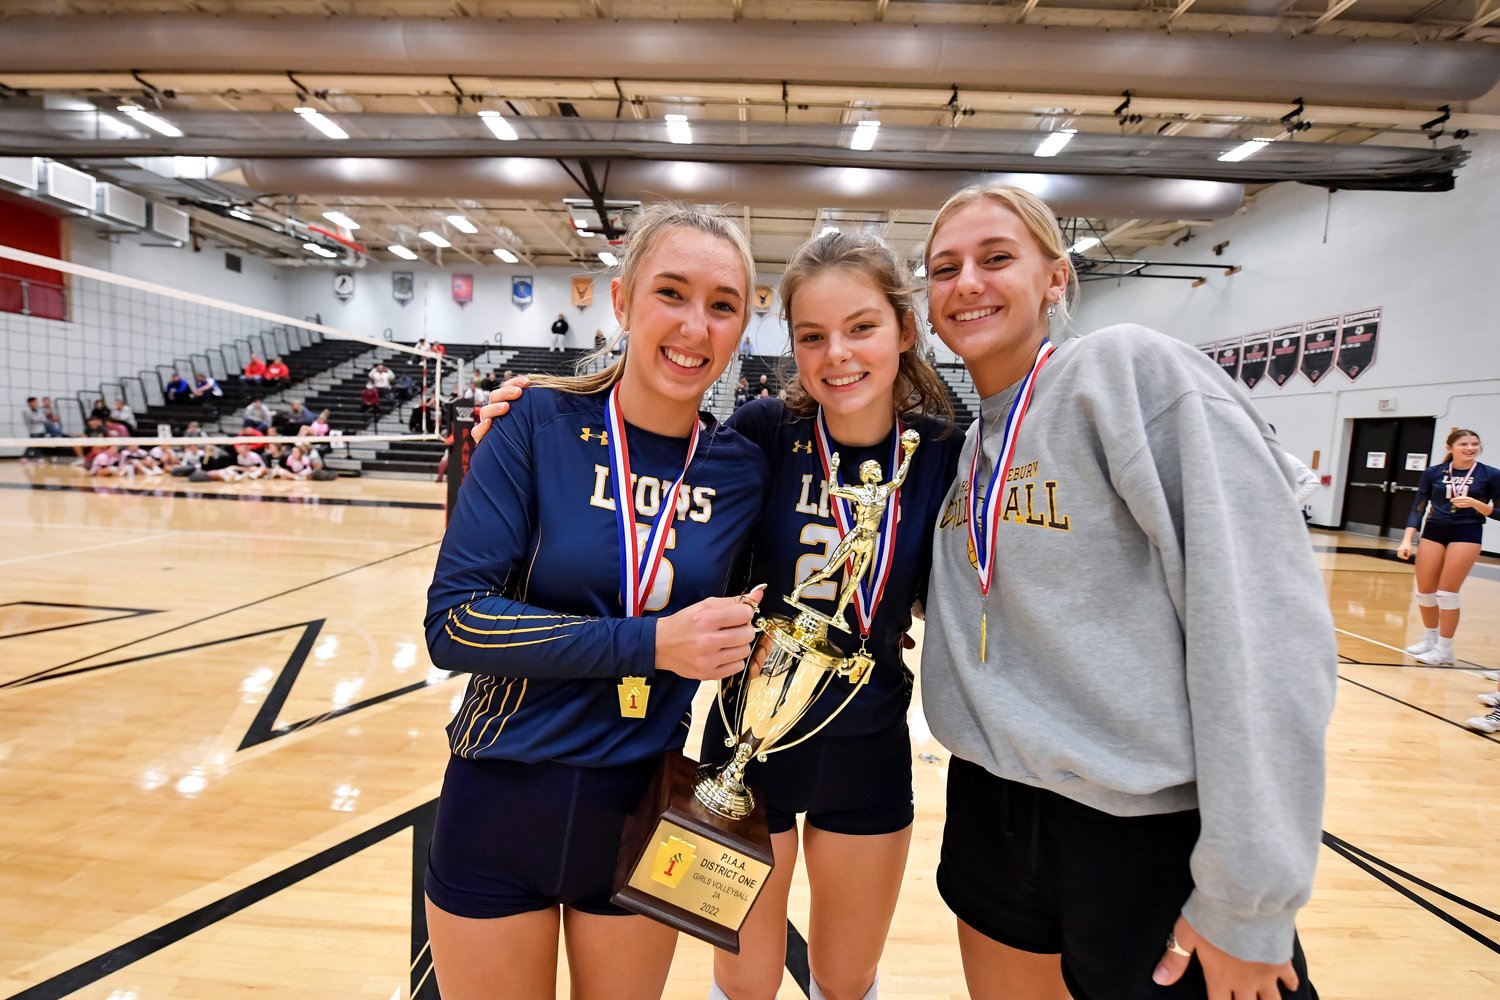 New Hope-Solebury’s captains with the championship trophy.